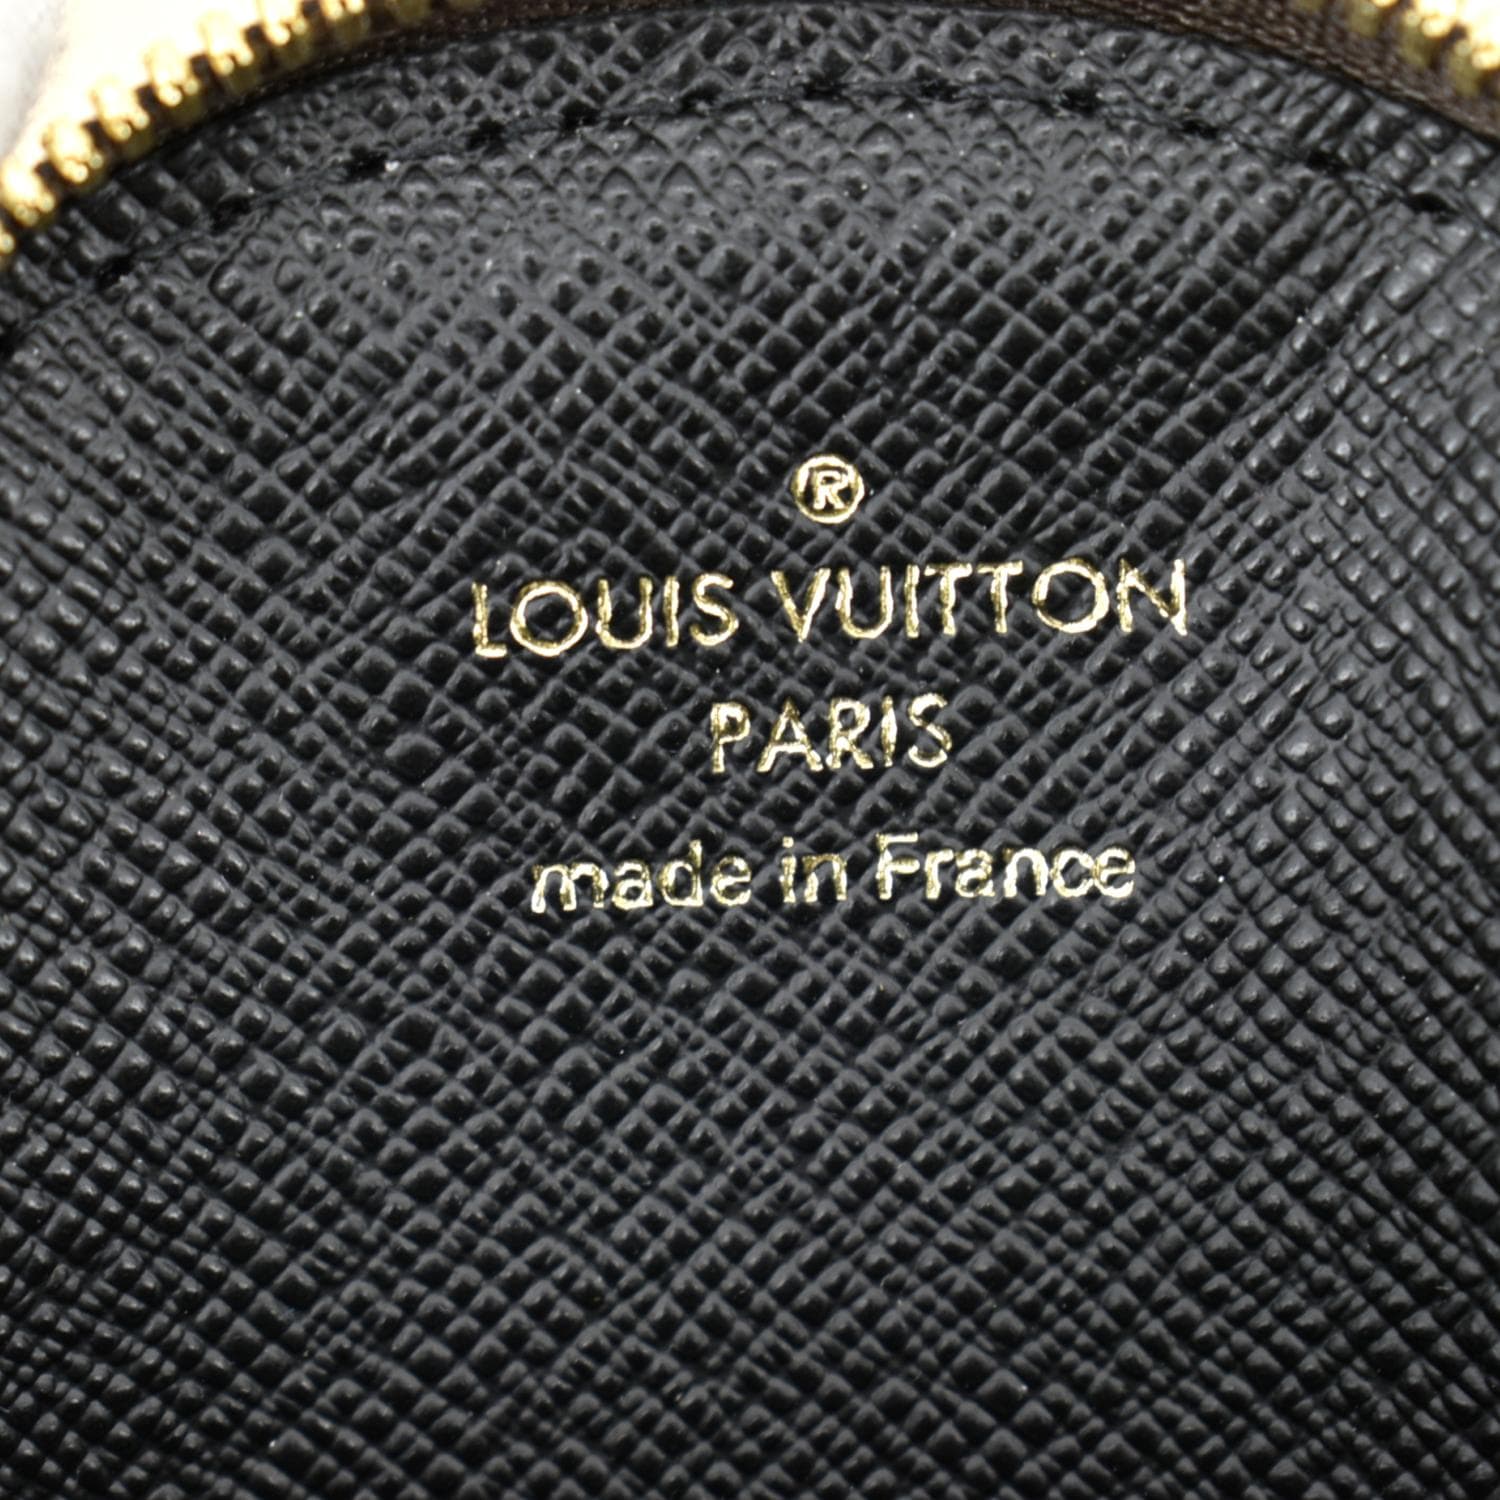 What do you guys think about this color? : r/Louisvuitton